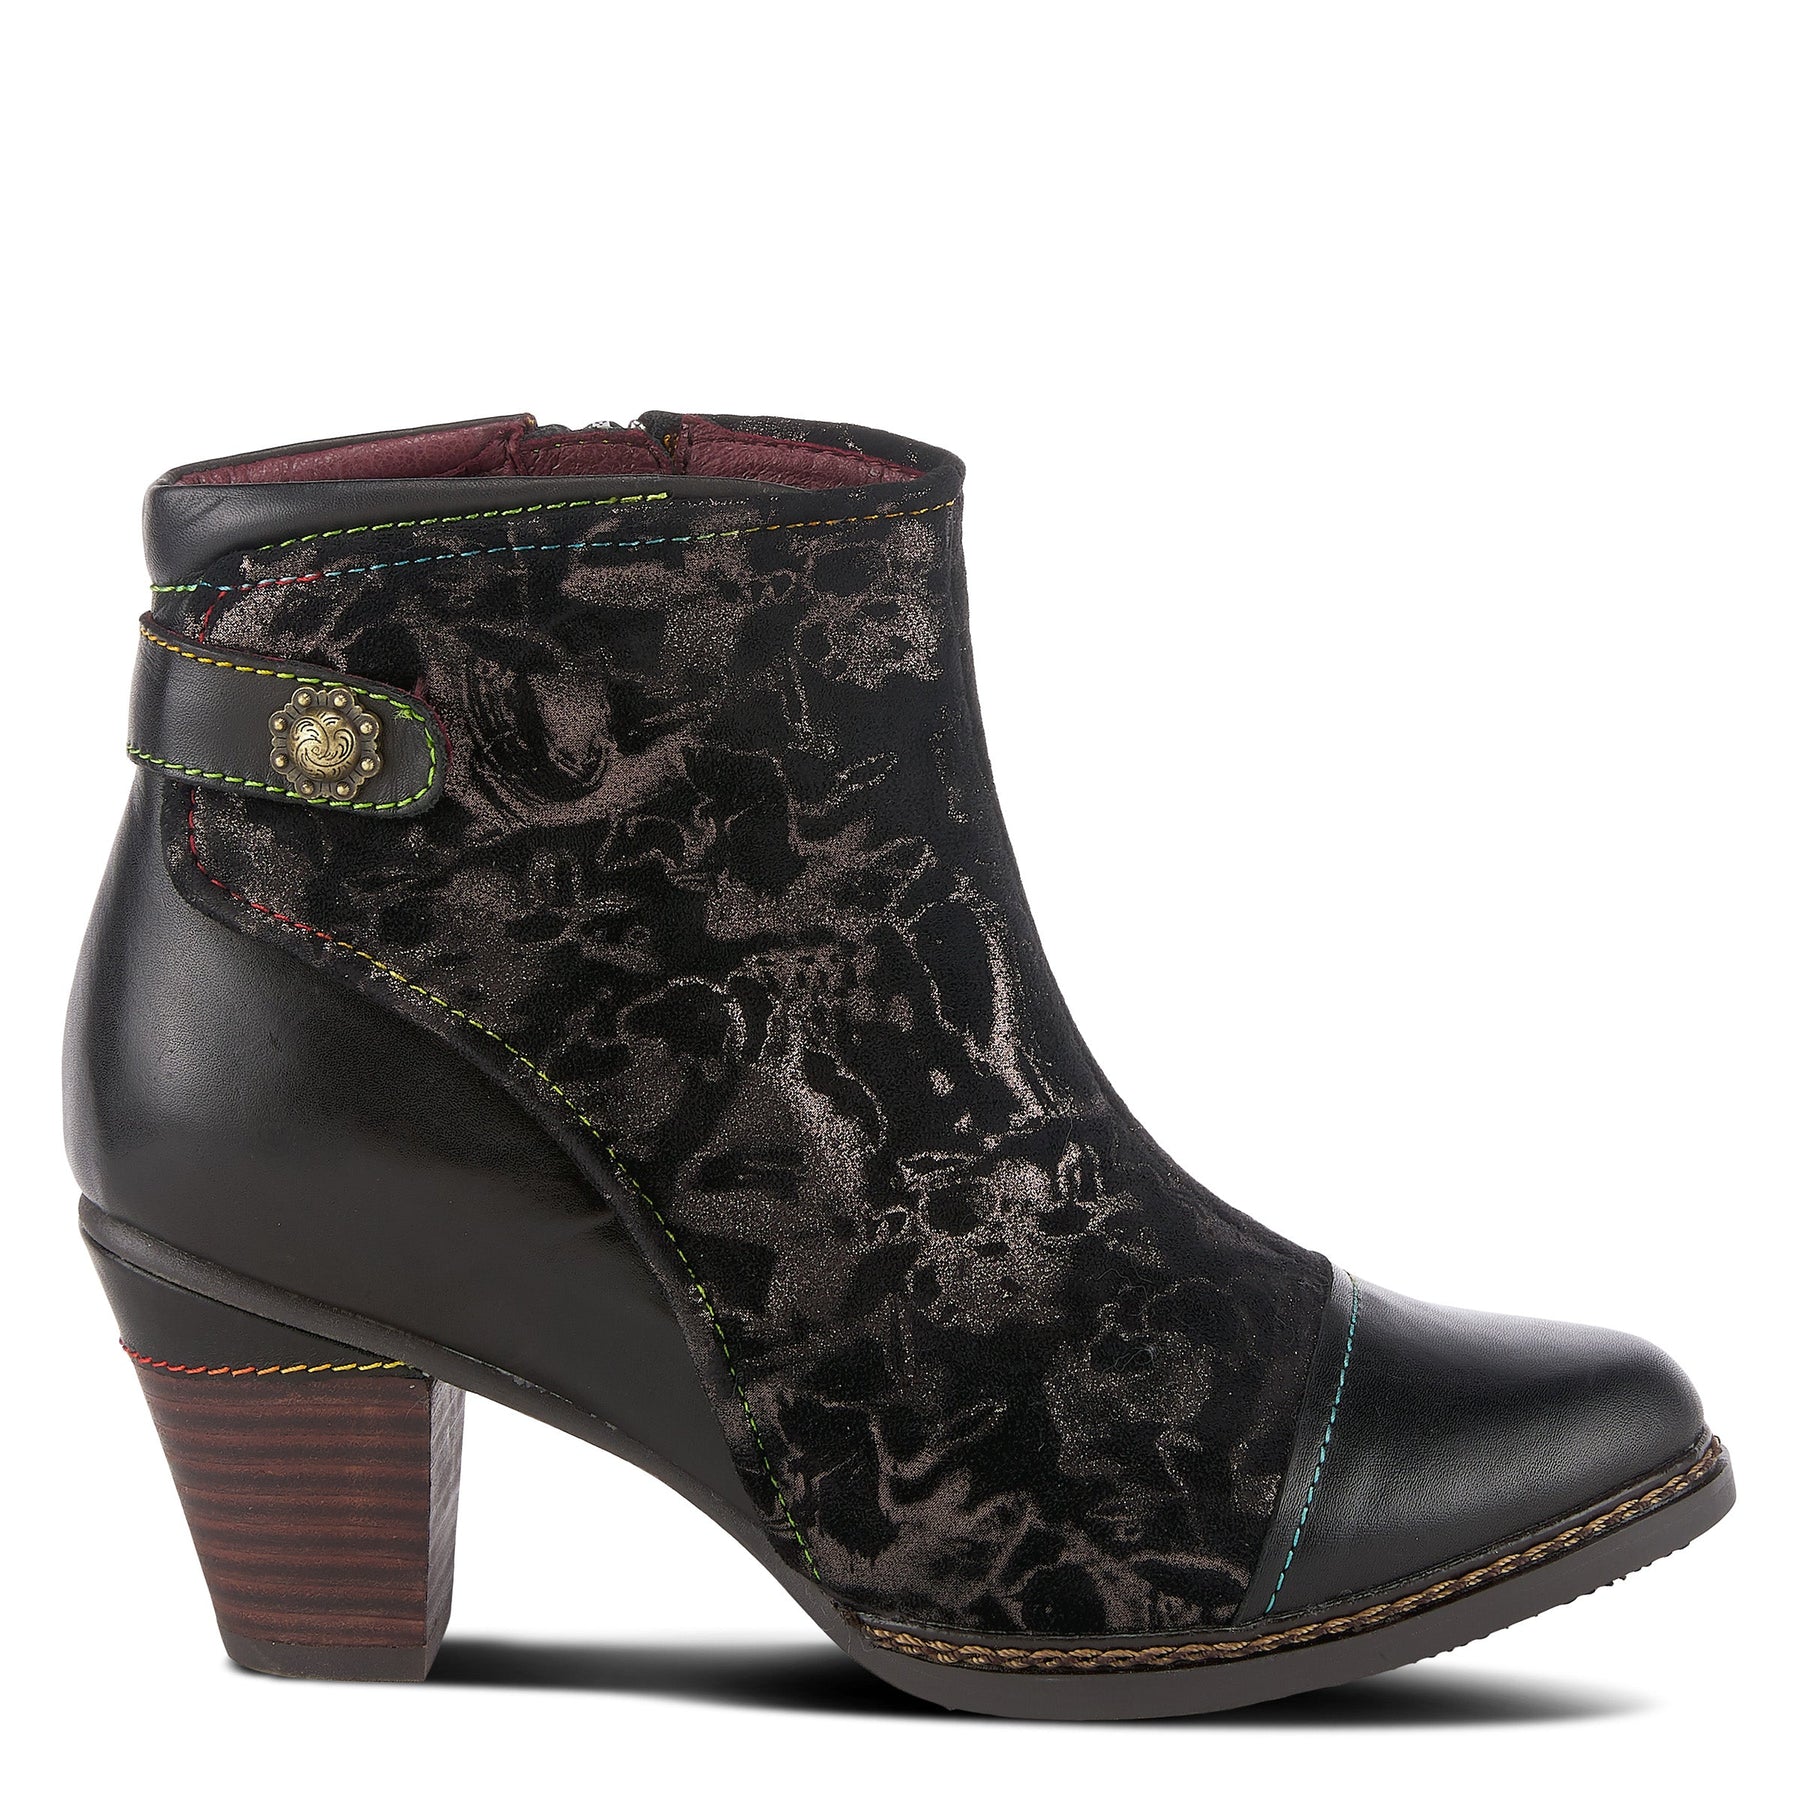 SOCUTE BOOTS by L'ARTISTE – Spring Step Shoes